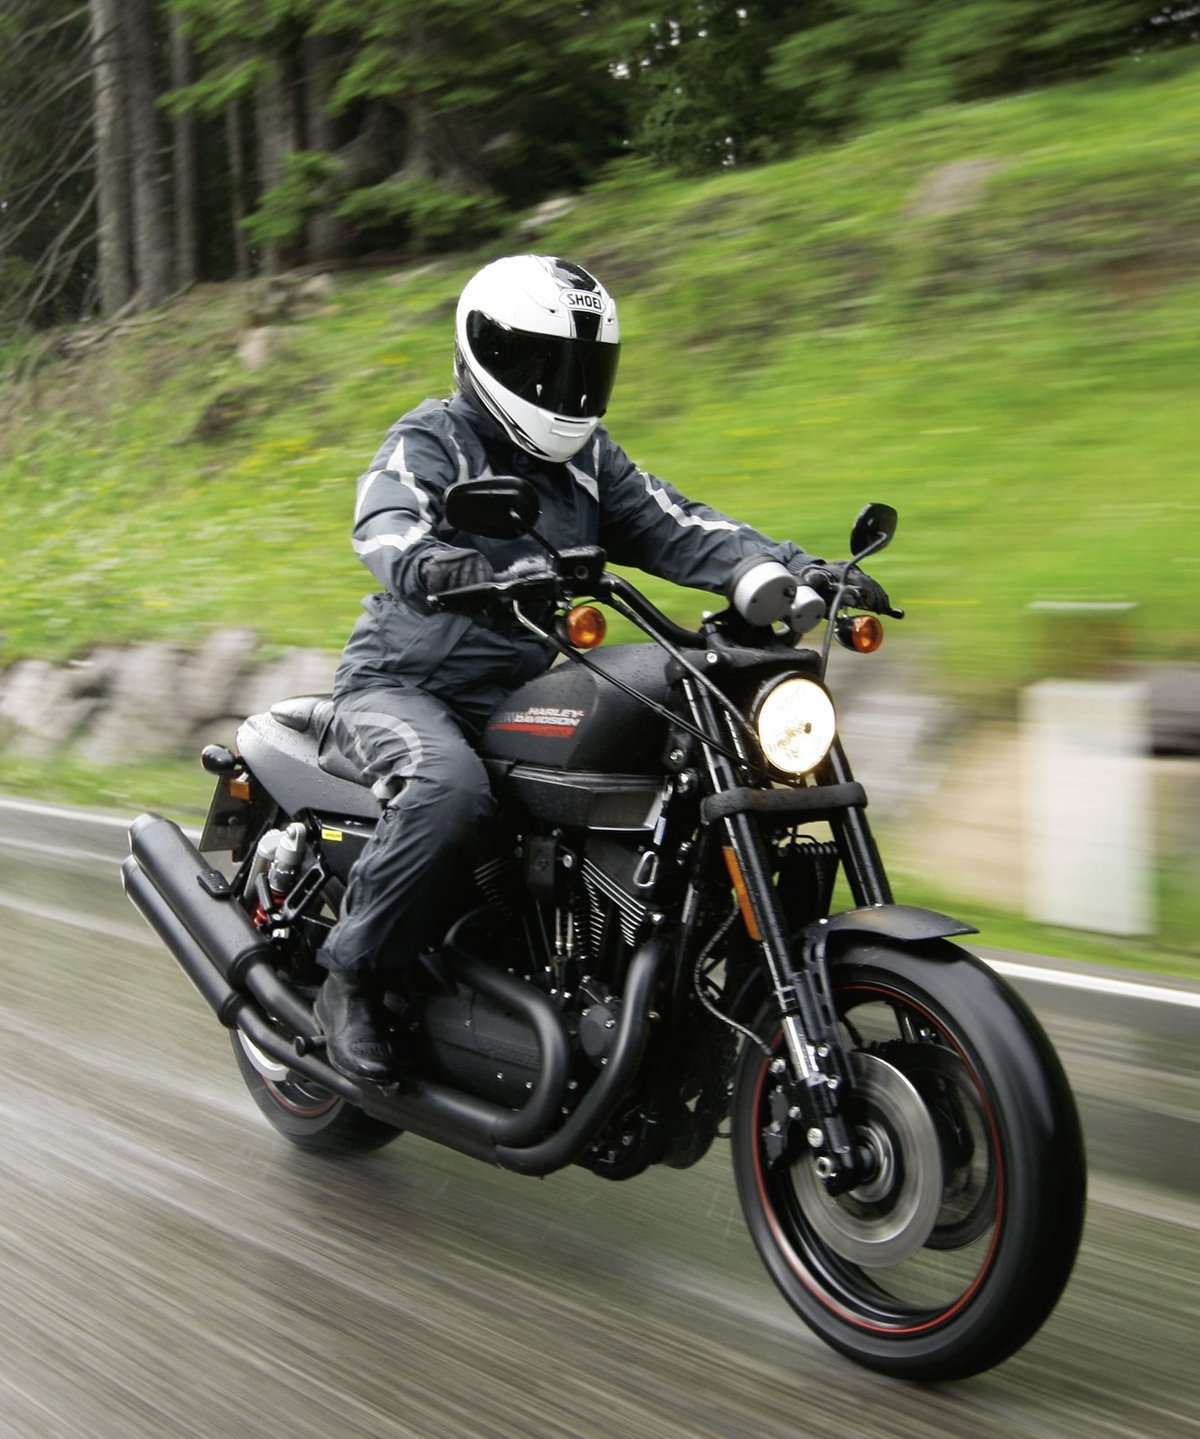 Driving tips - motorcycling in the rain